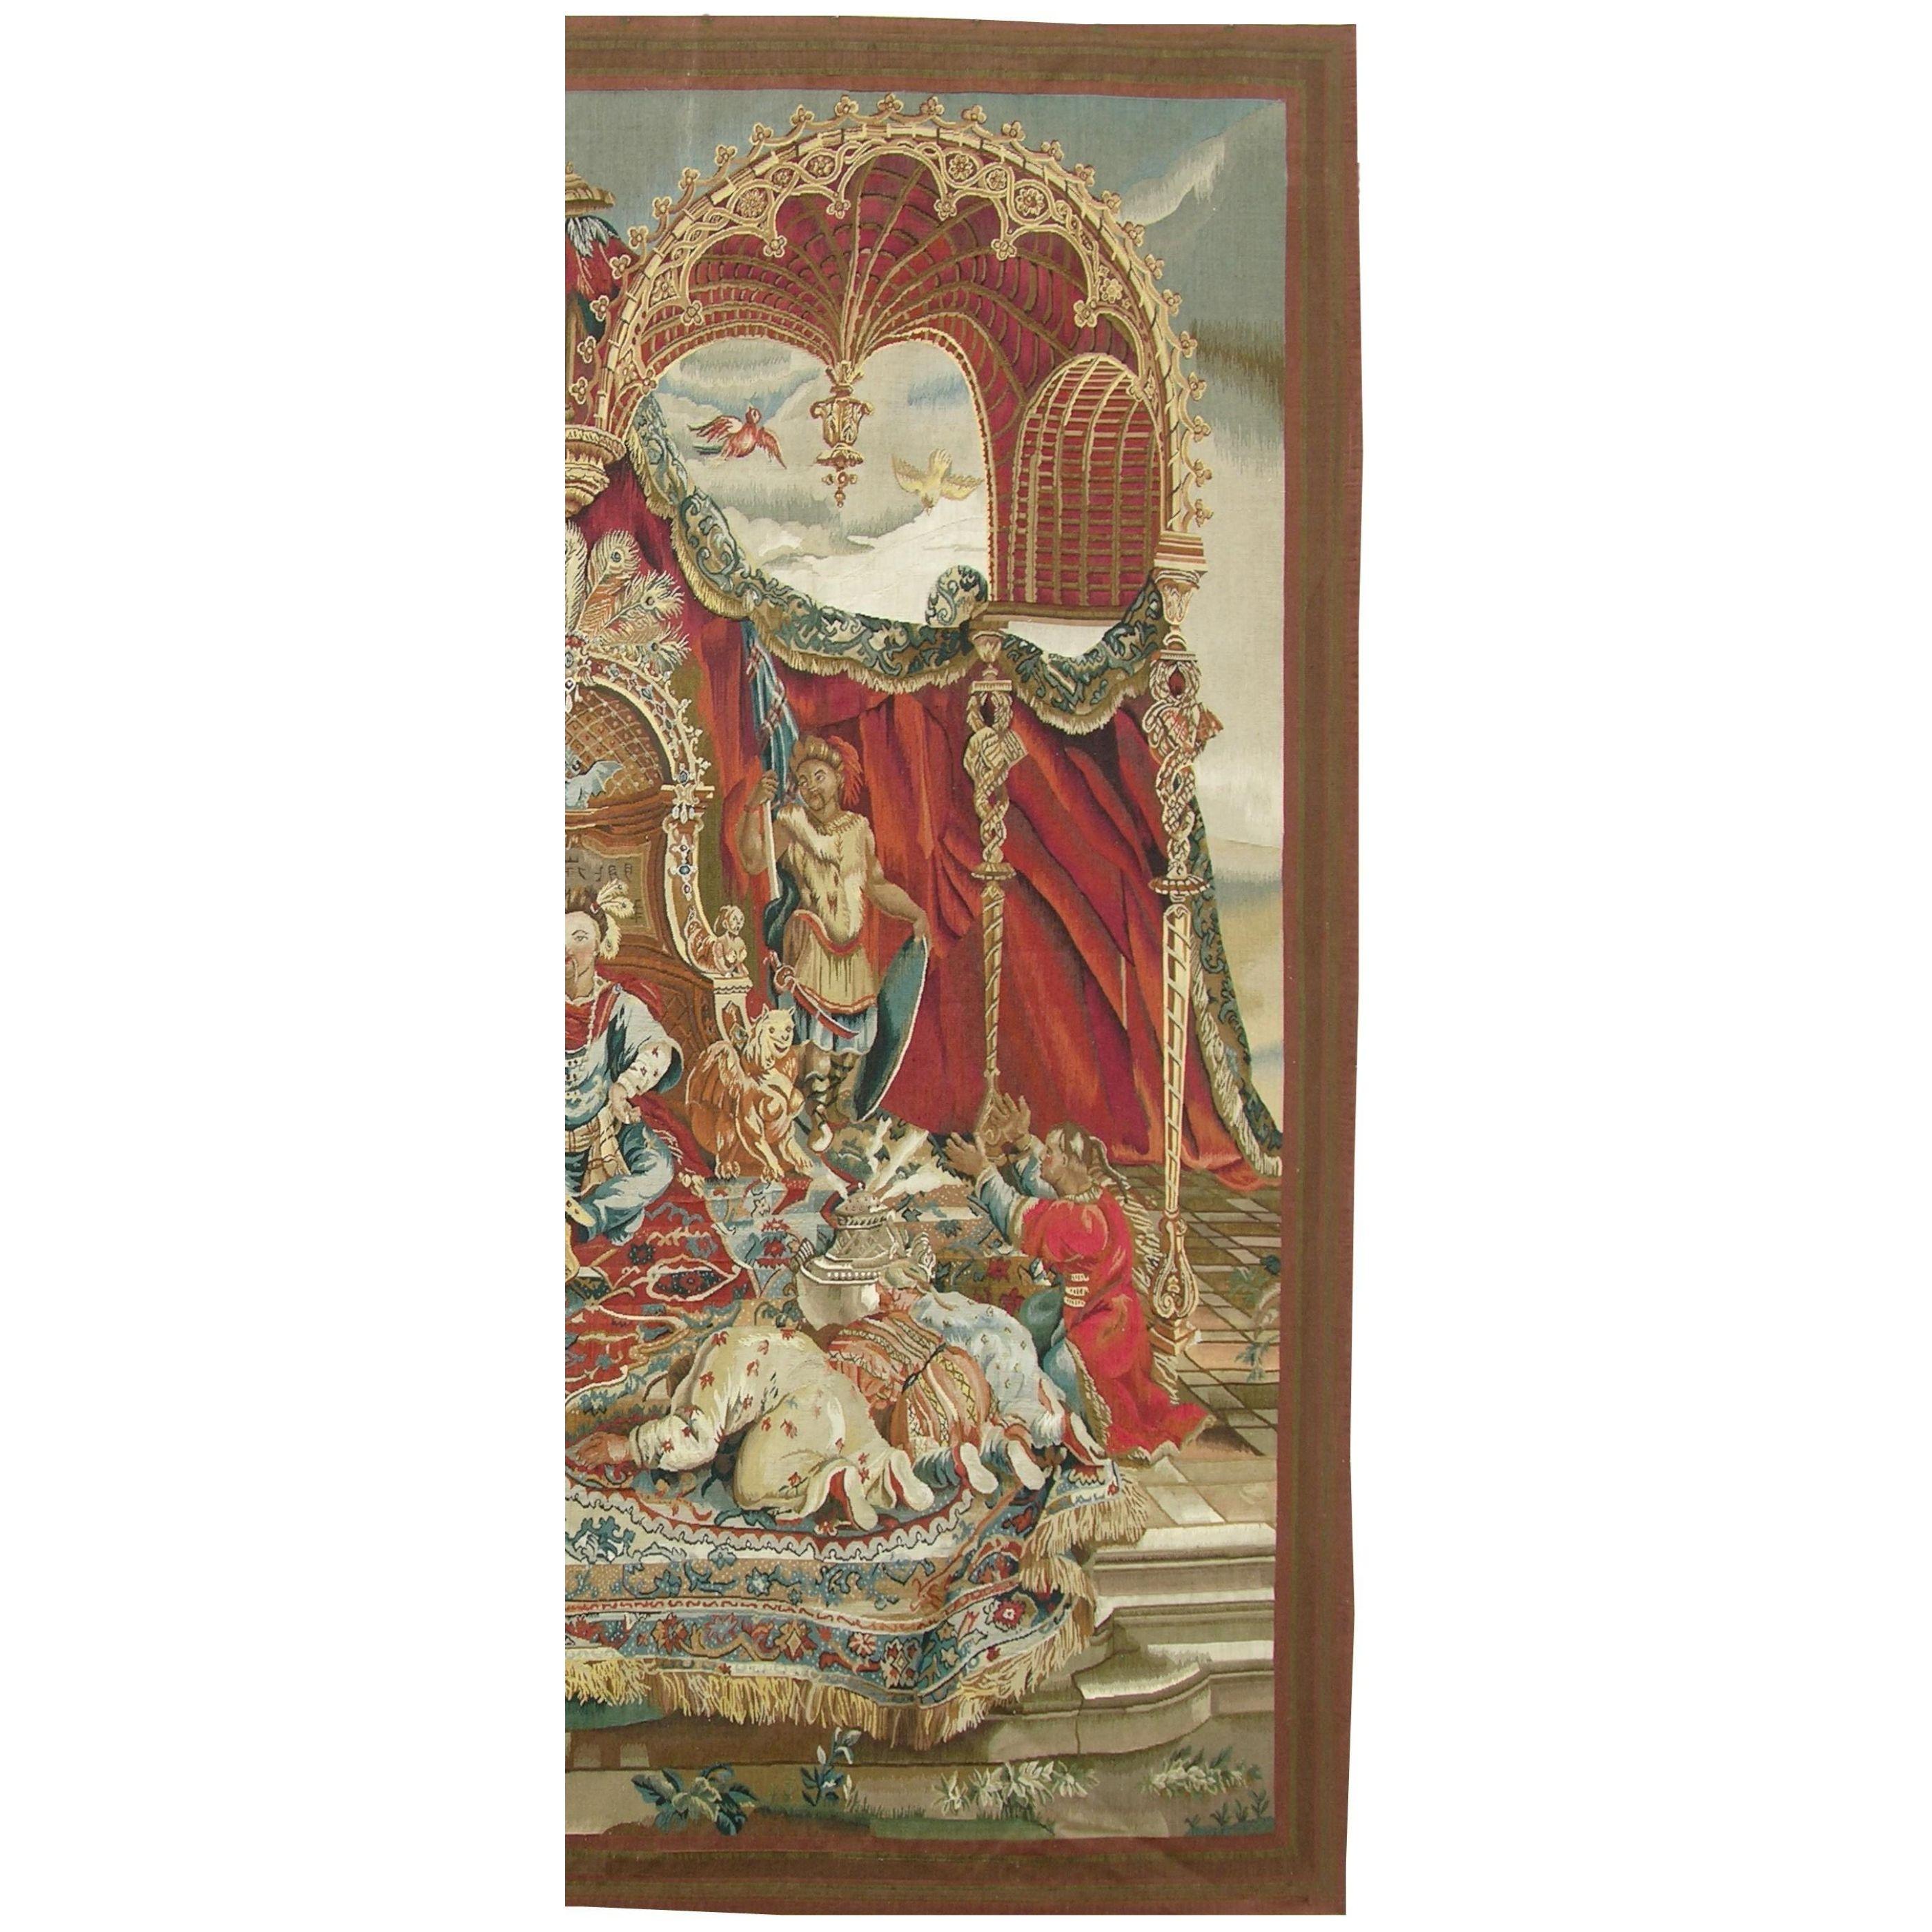 Other Vintage Tapestry Depicting King on the Throne 7'9